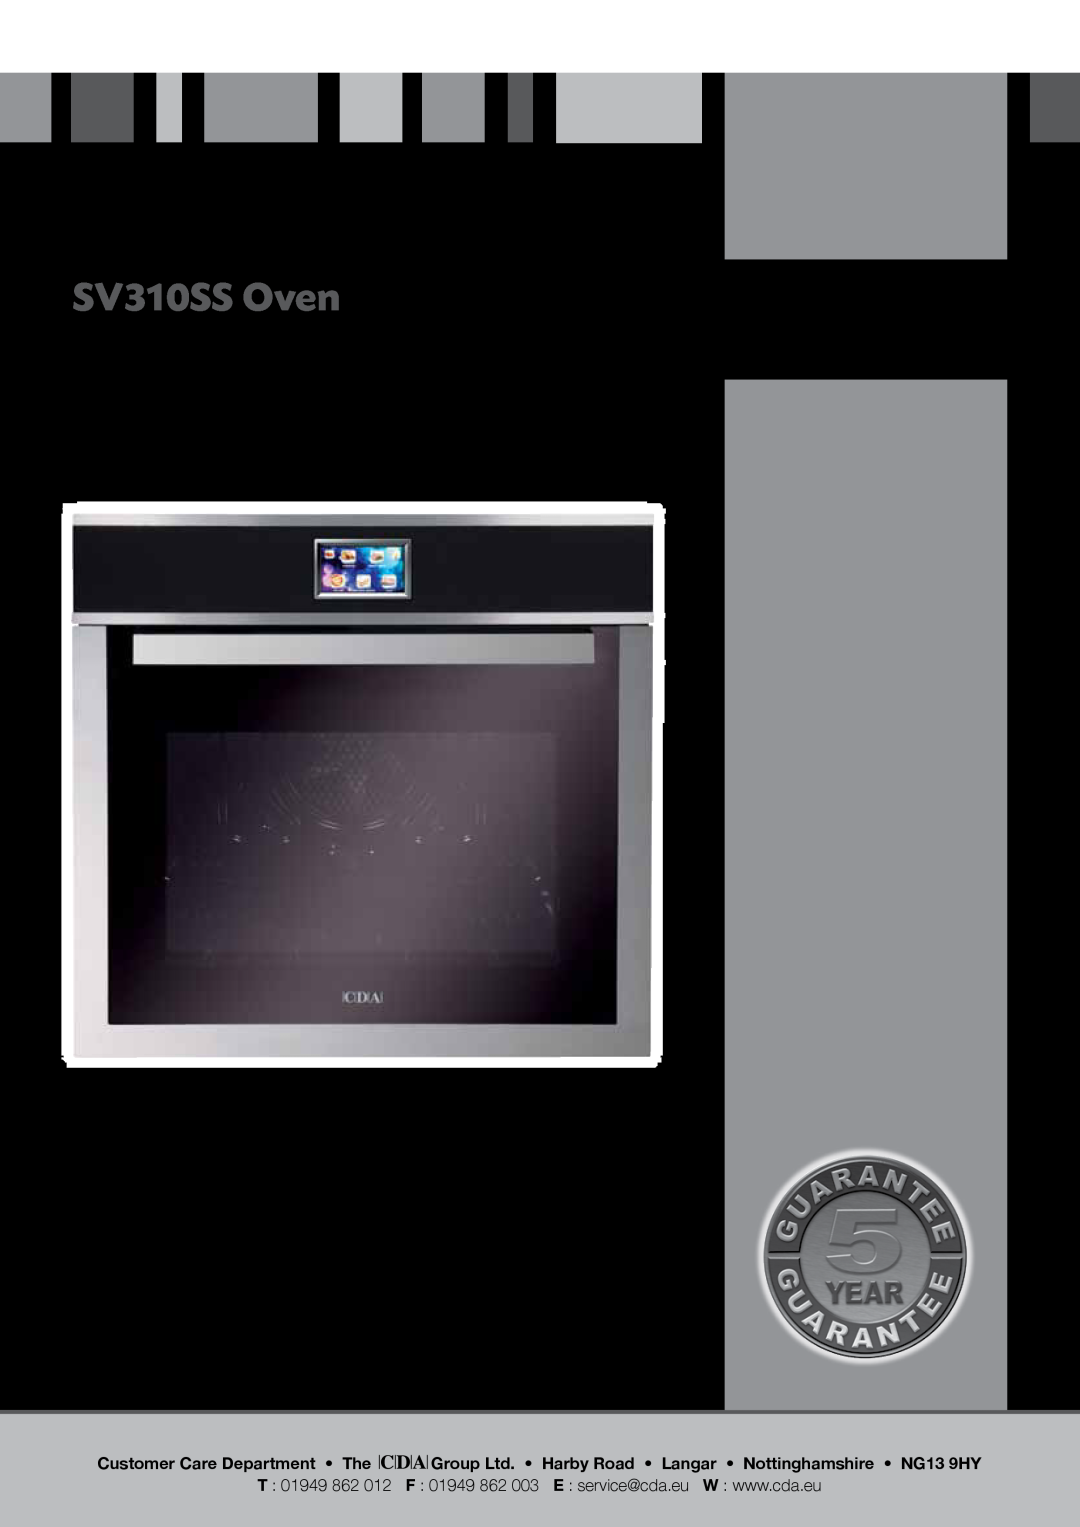 CDA manual SV310SS Oven, Manual for Installation, Use and Maintenance, Customer Care Department The, T 01949 862 